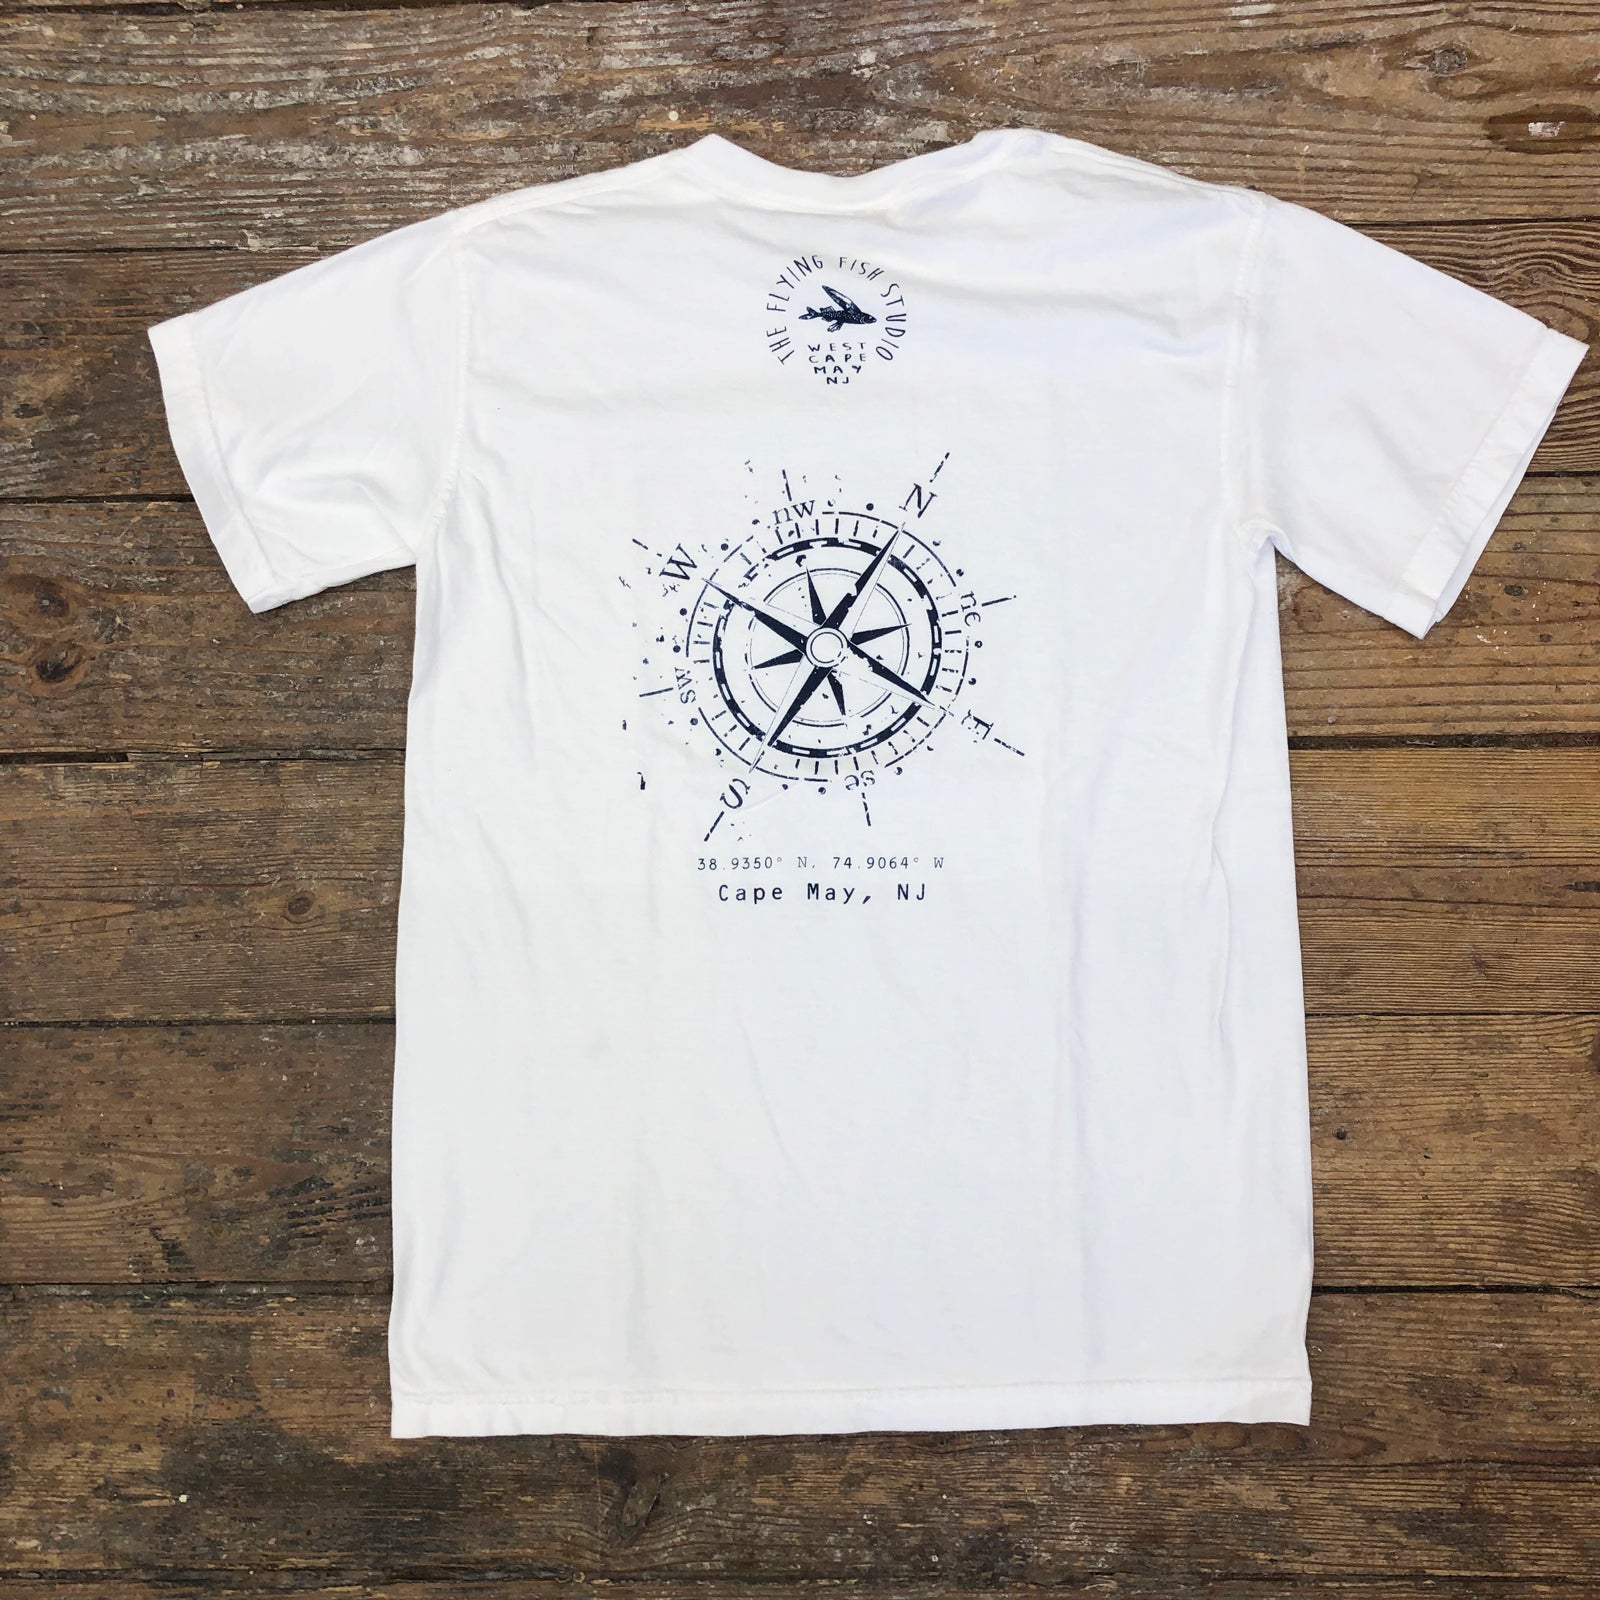 A white t-shirt with a 'Compass' design on the back.